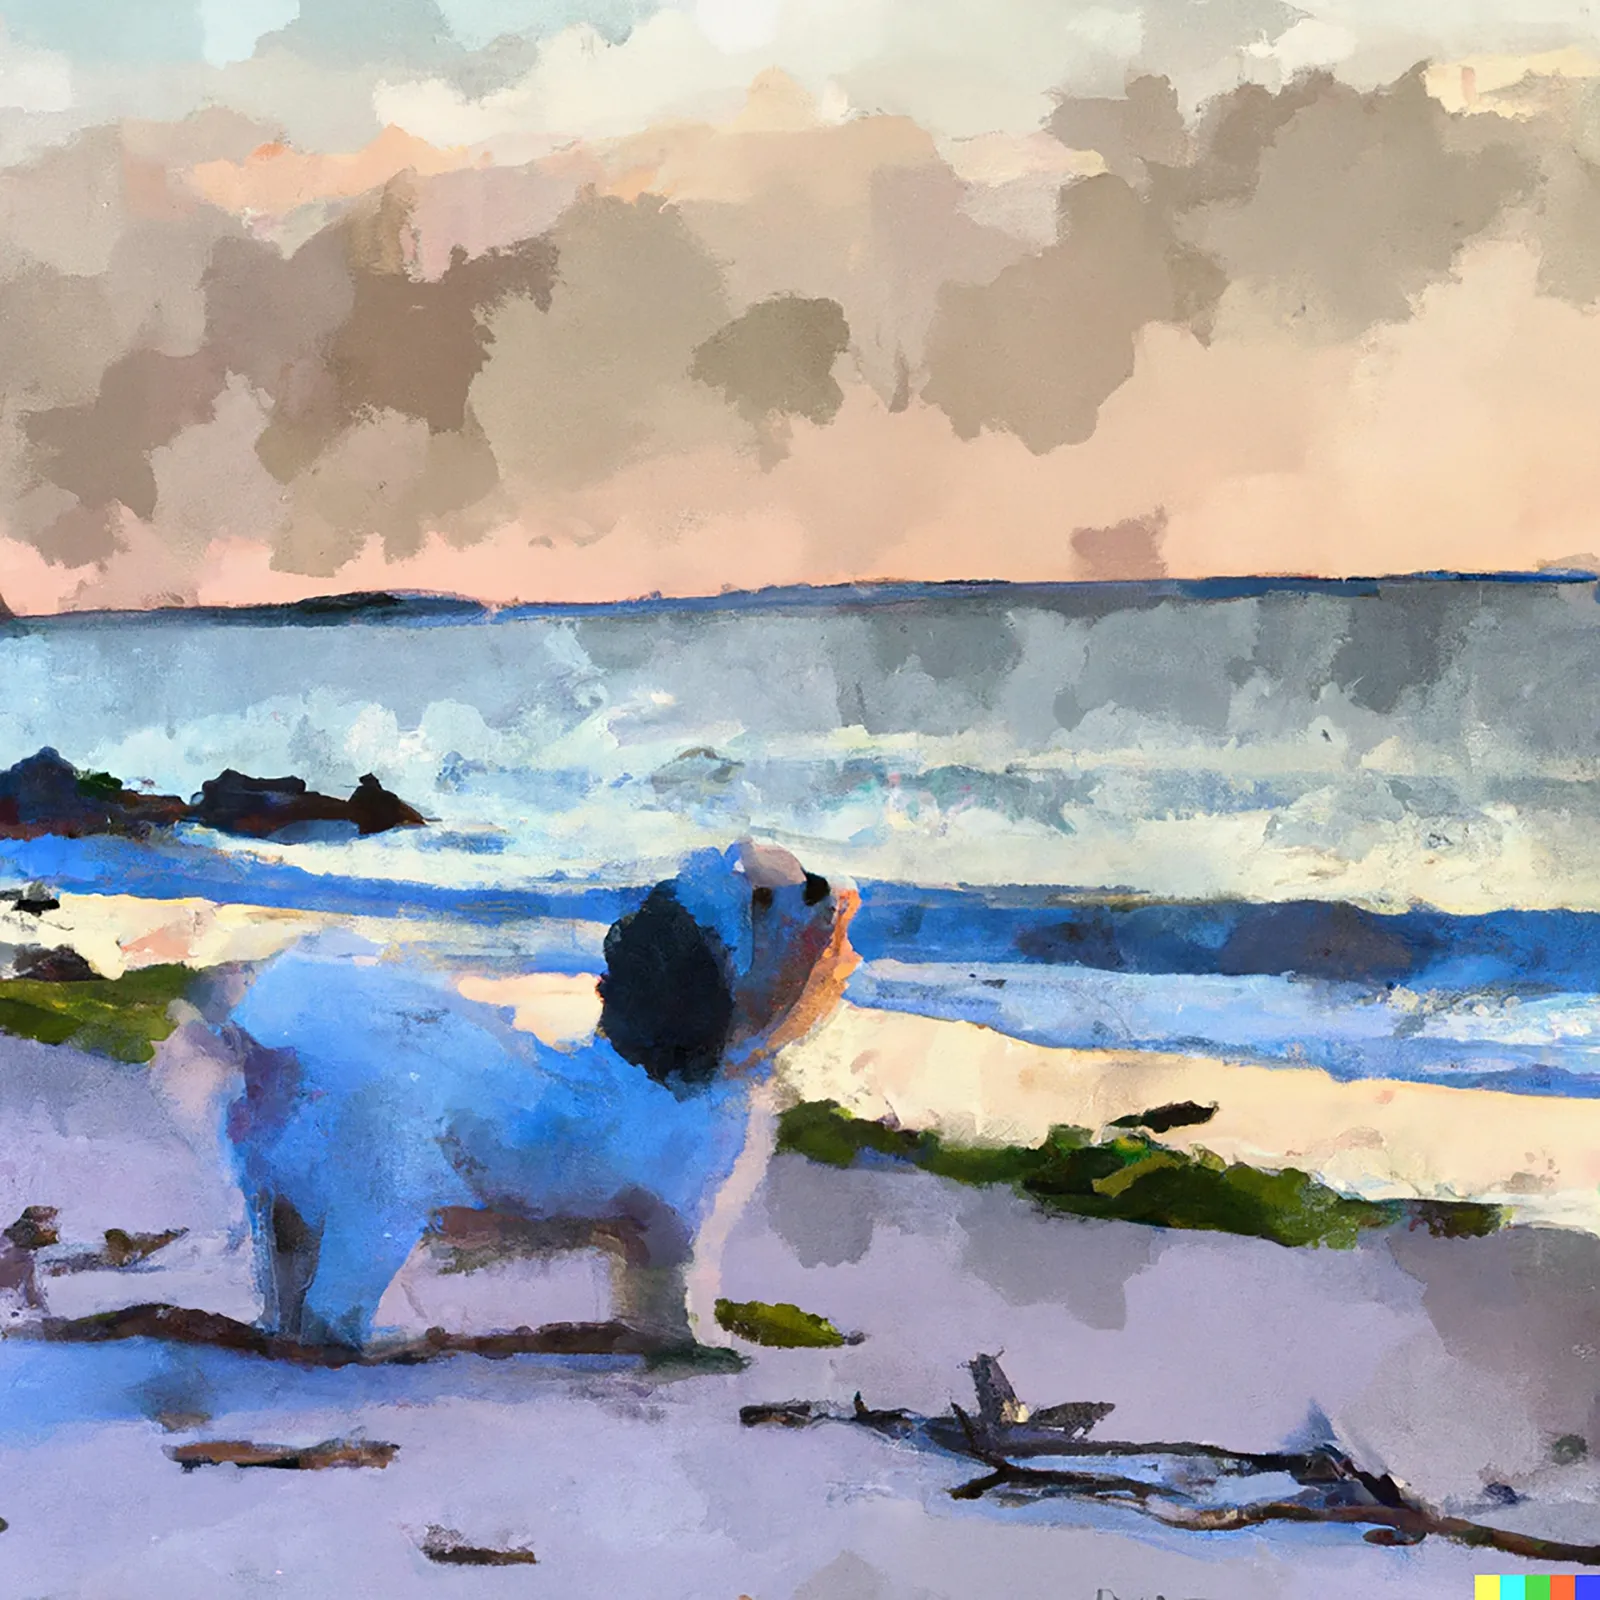 A Havanese at six pm on an East Coast beach in the style of a Winslow Homer watercolor